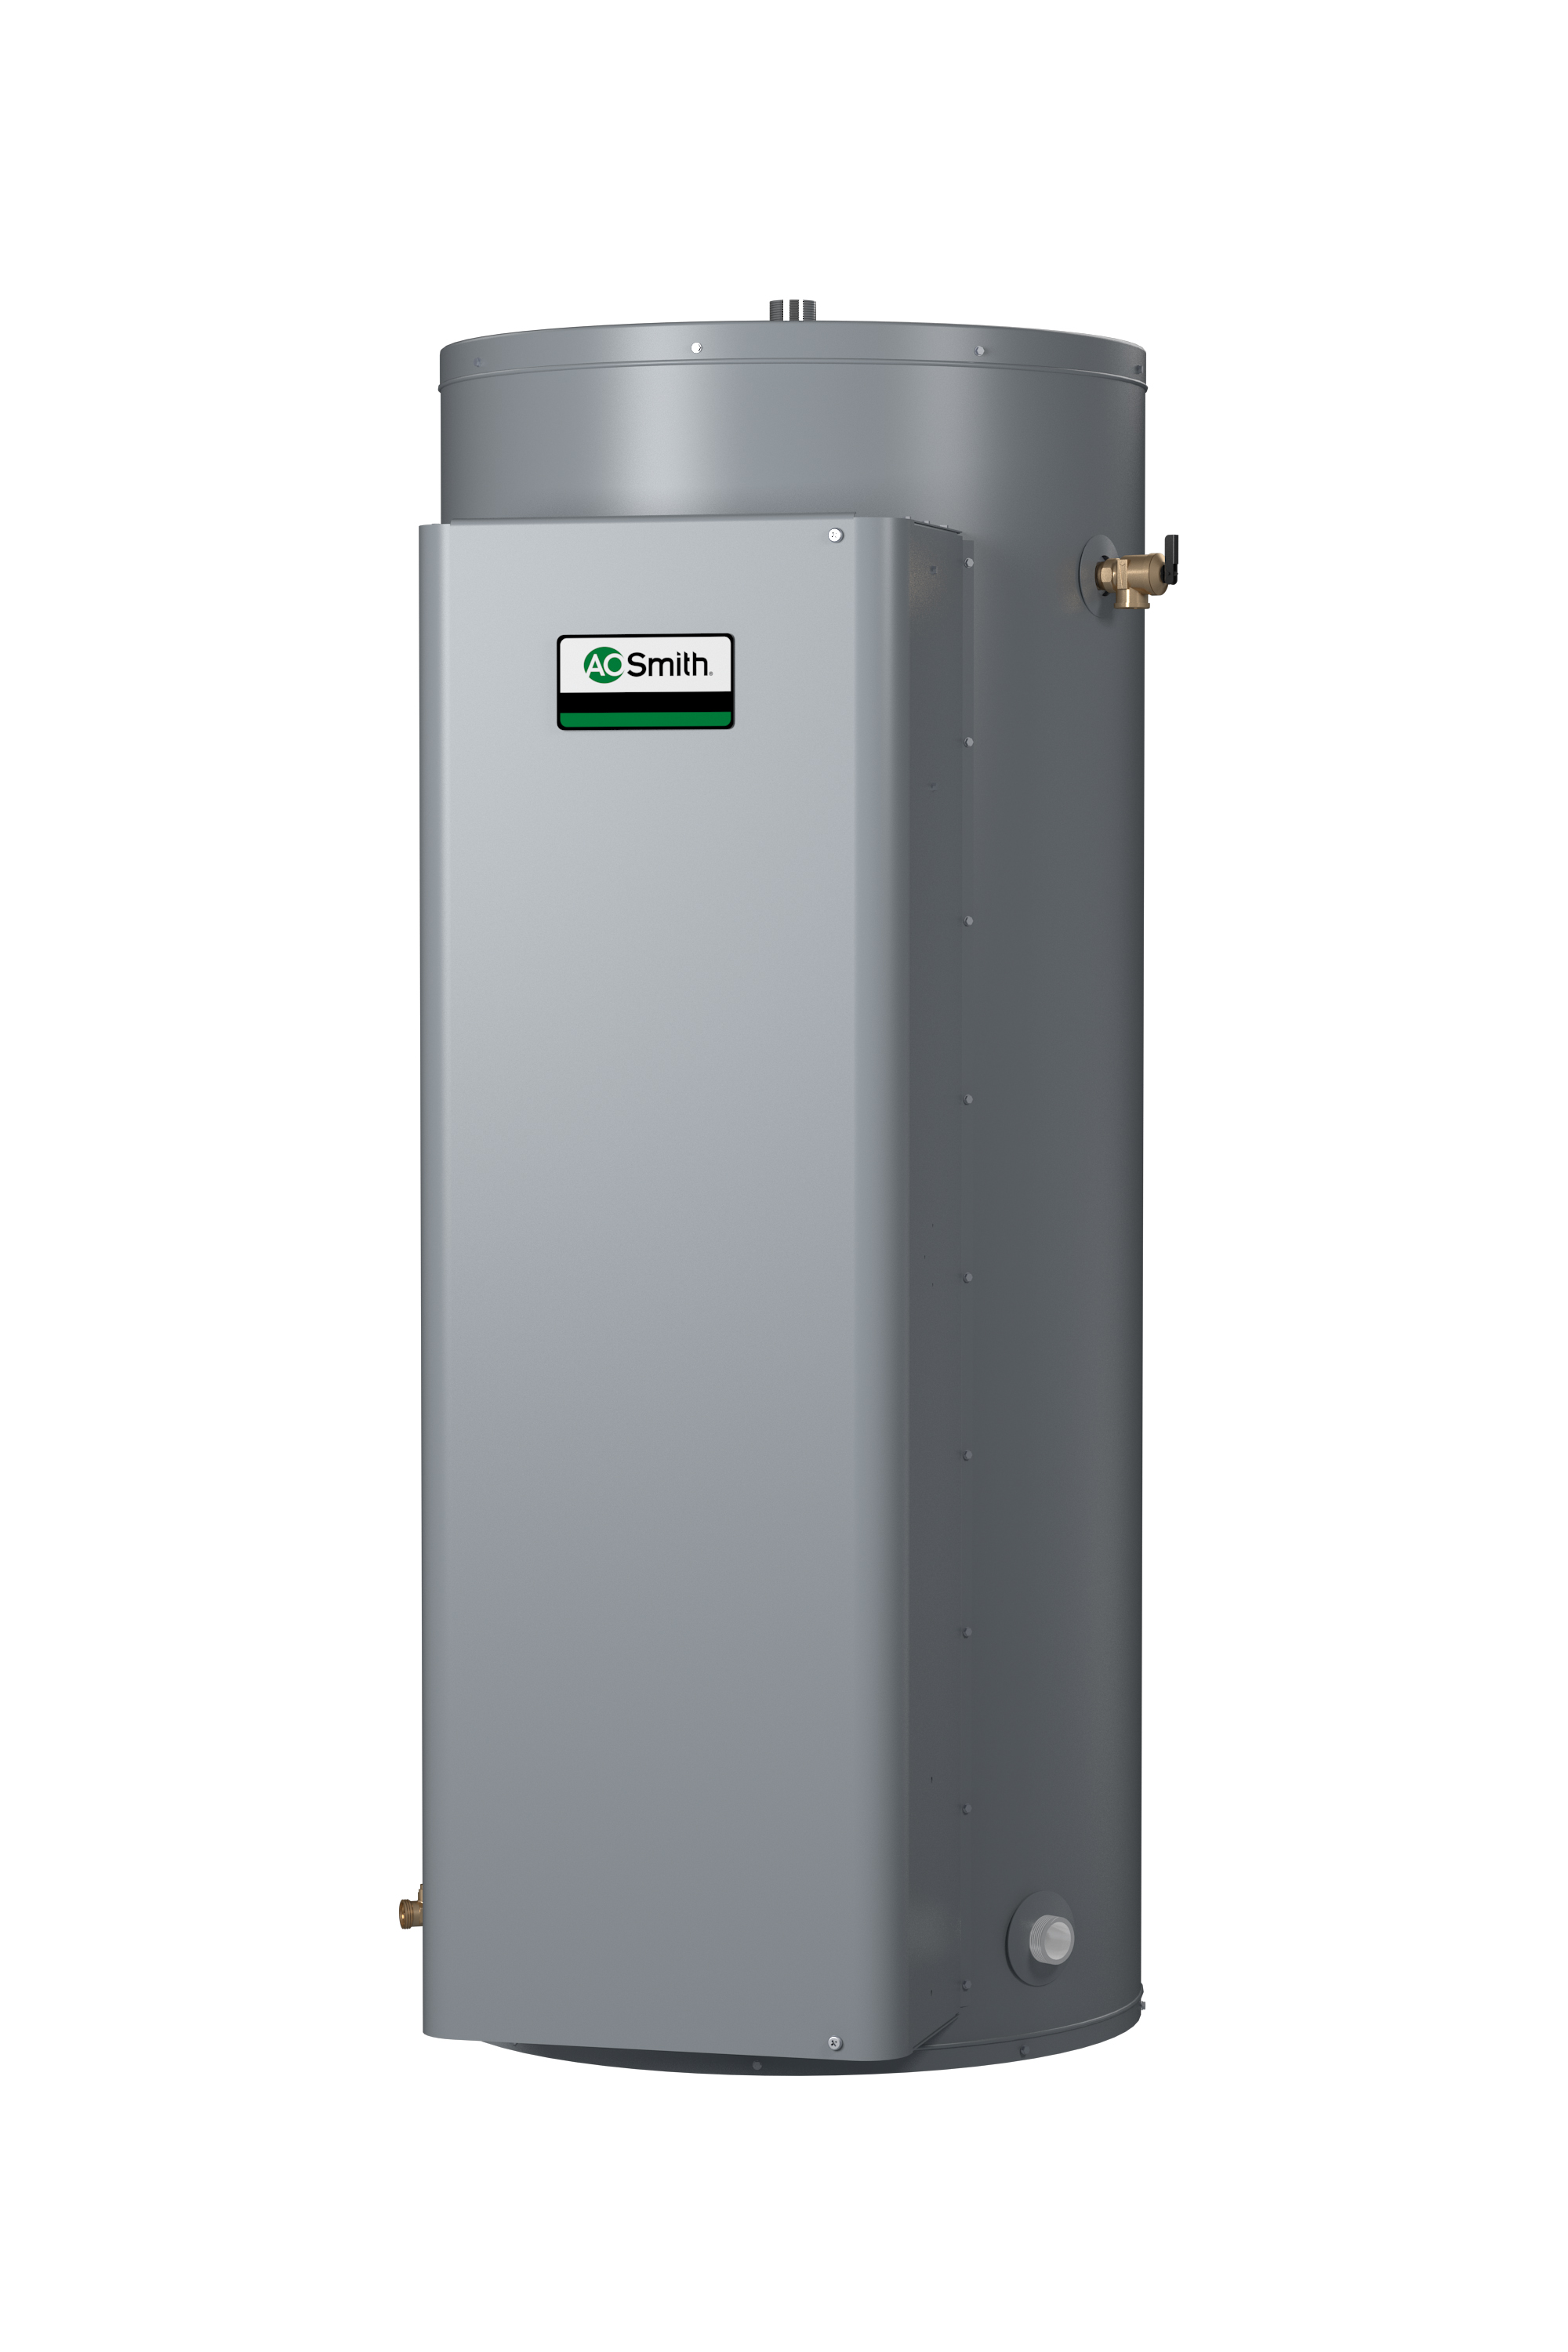 AO SMITH DRE-52A-15, 50 GALLONS, 15.0KW, 480 VOLT, 31.3 AMPS, 1 PHASE, 3 ELEMENT, ASME COMMERCIAL ELECTRIC WATER HEATER, GOLD SERIES